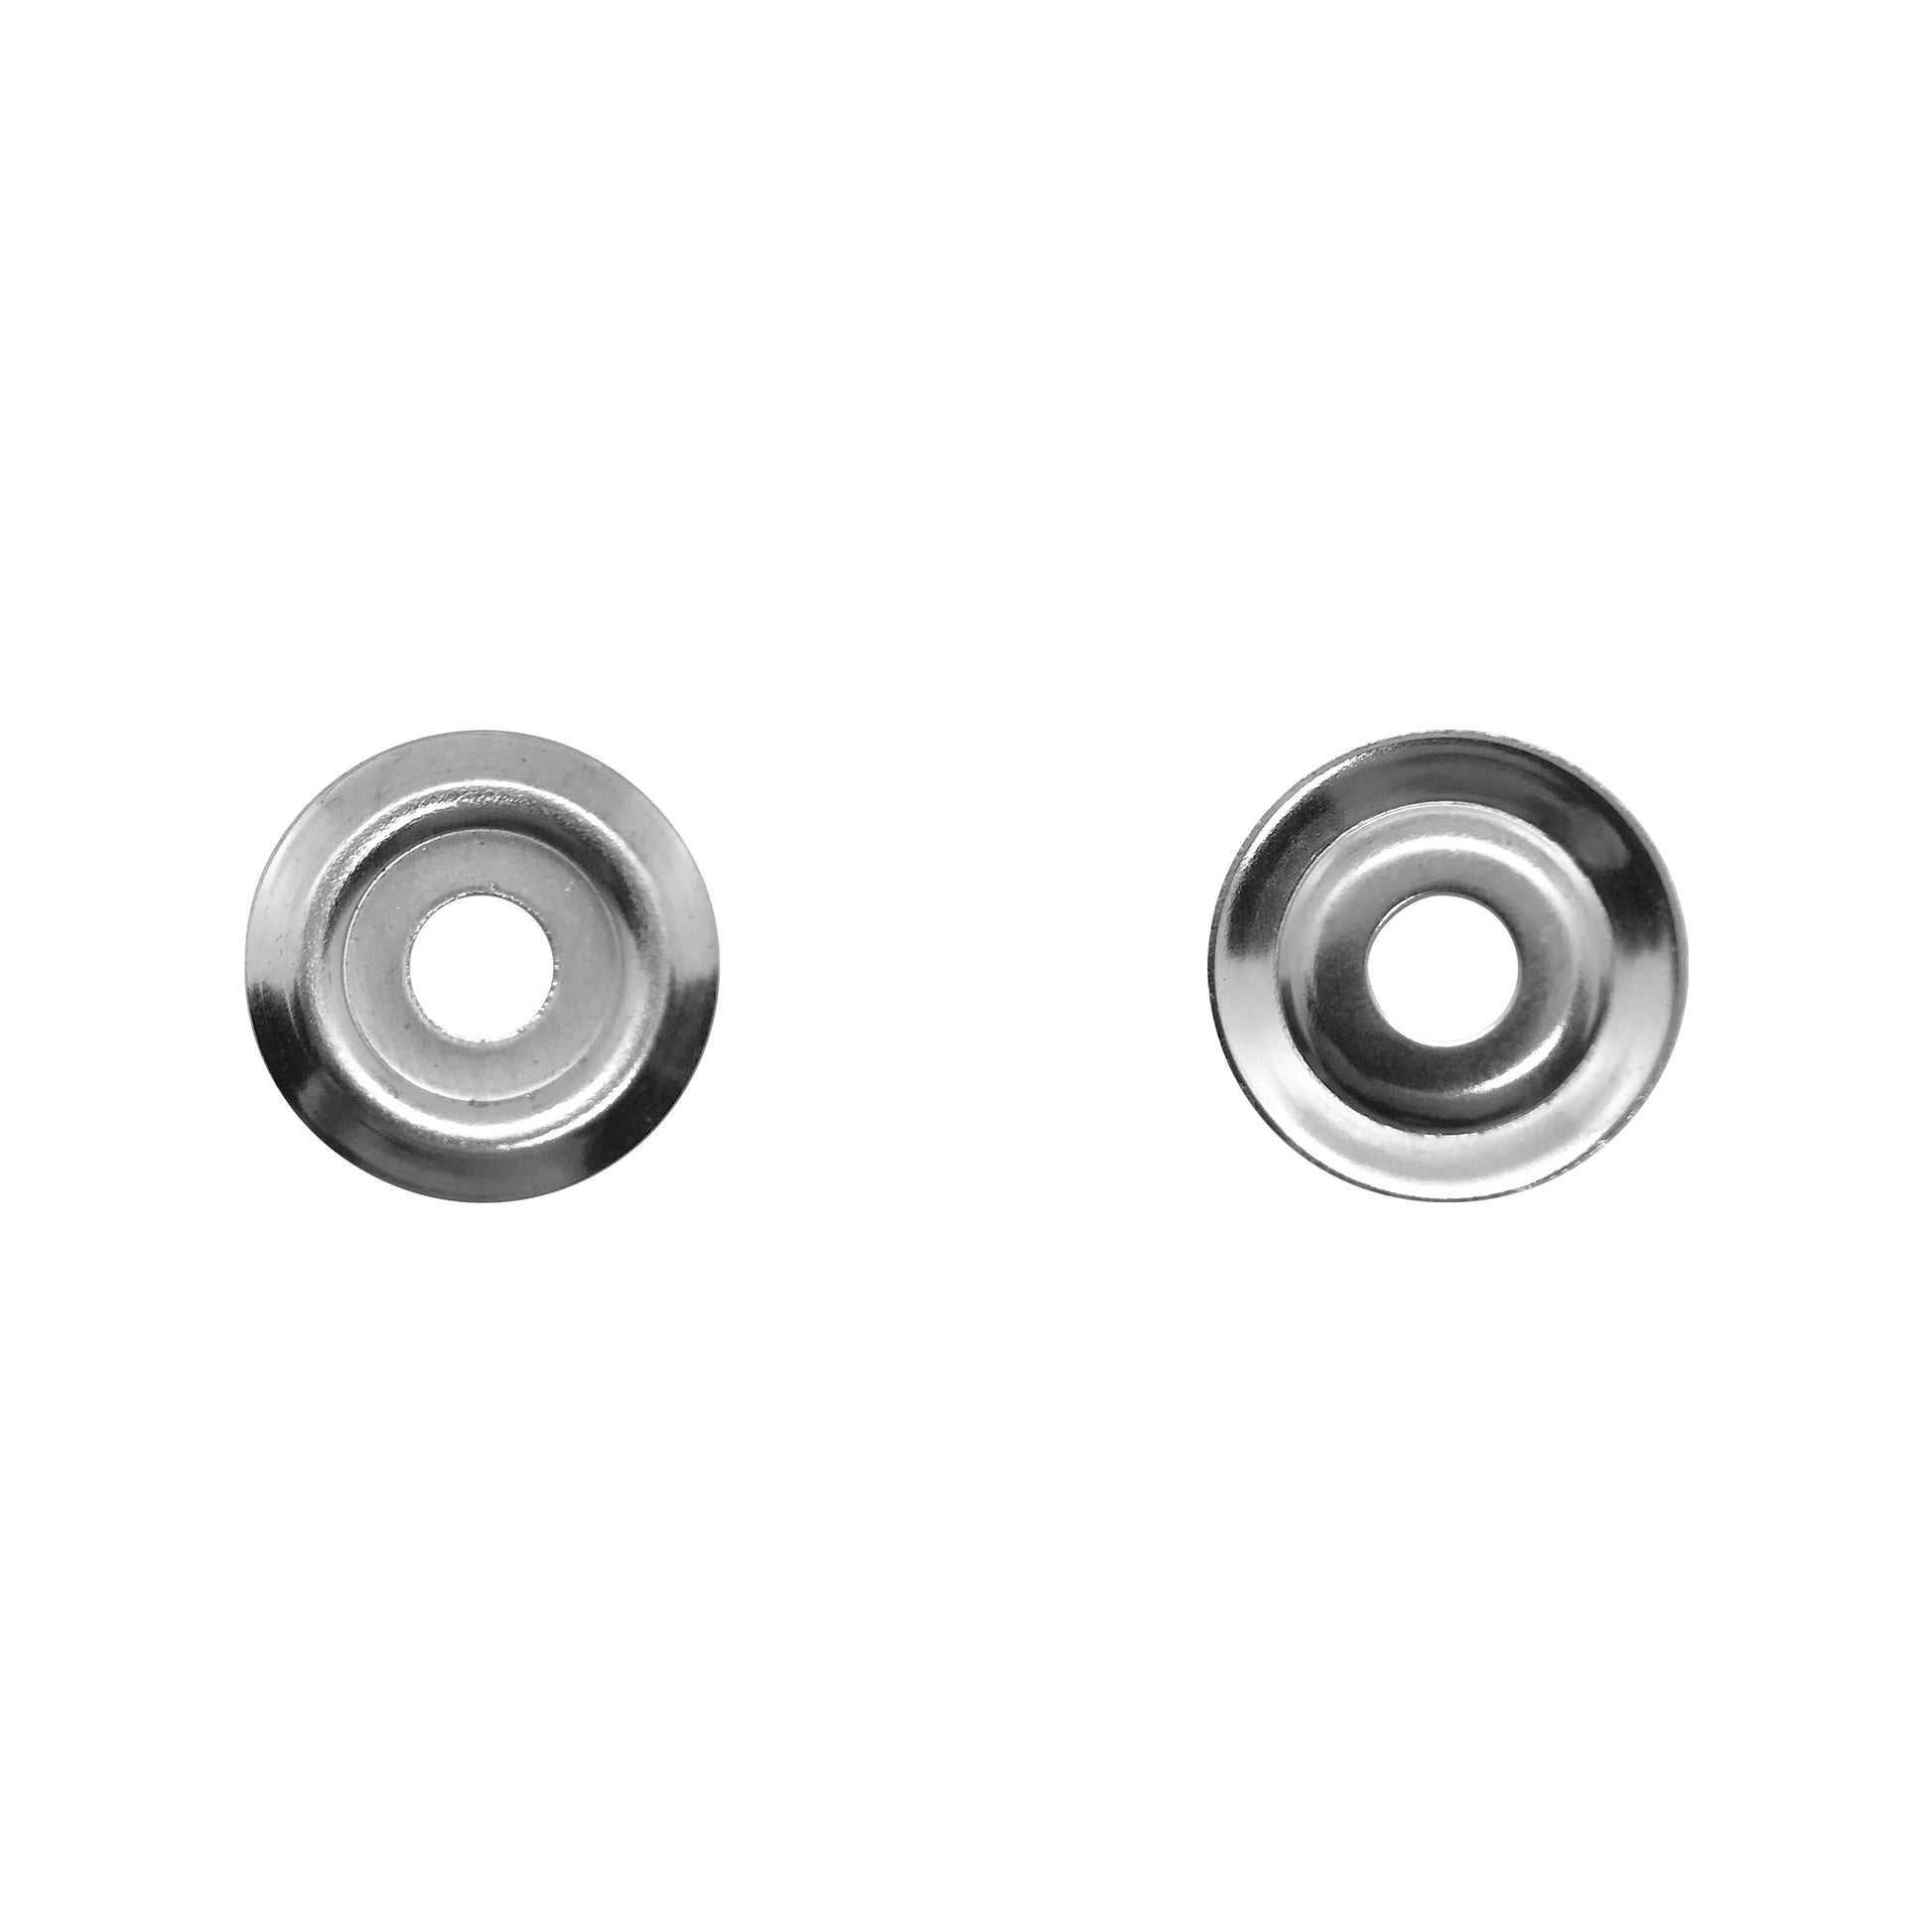 Binding Screw Washer - Front / Back - Silver / Nickel by Gobrecht & Ulrich